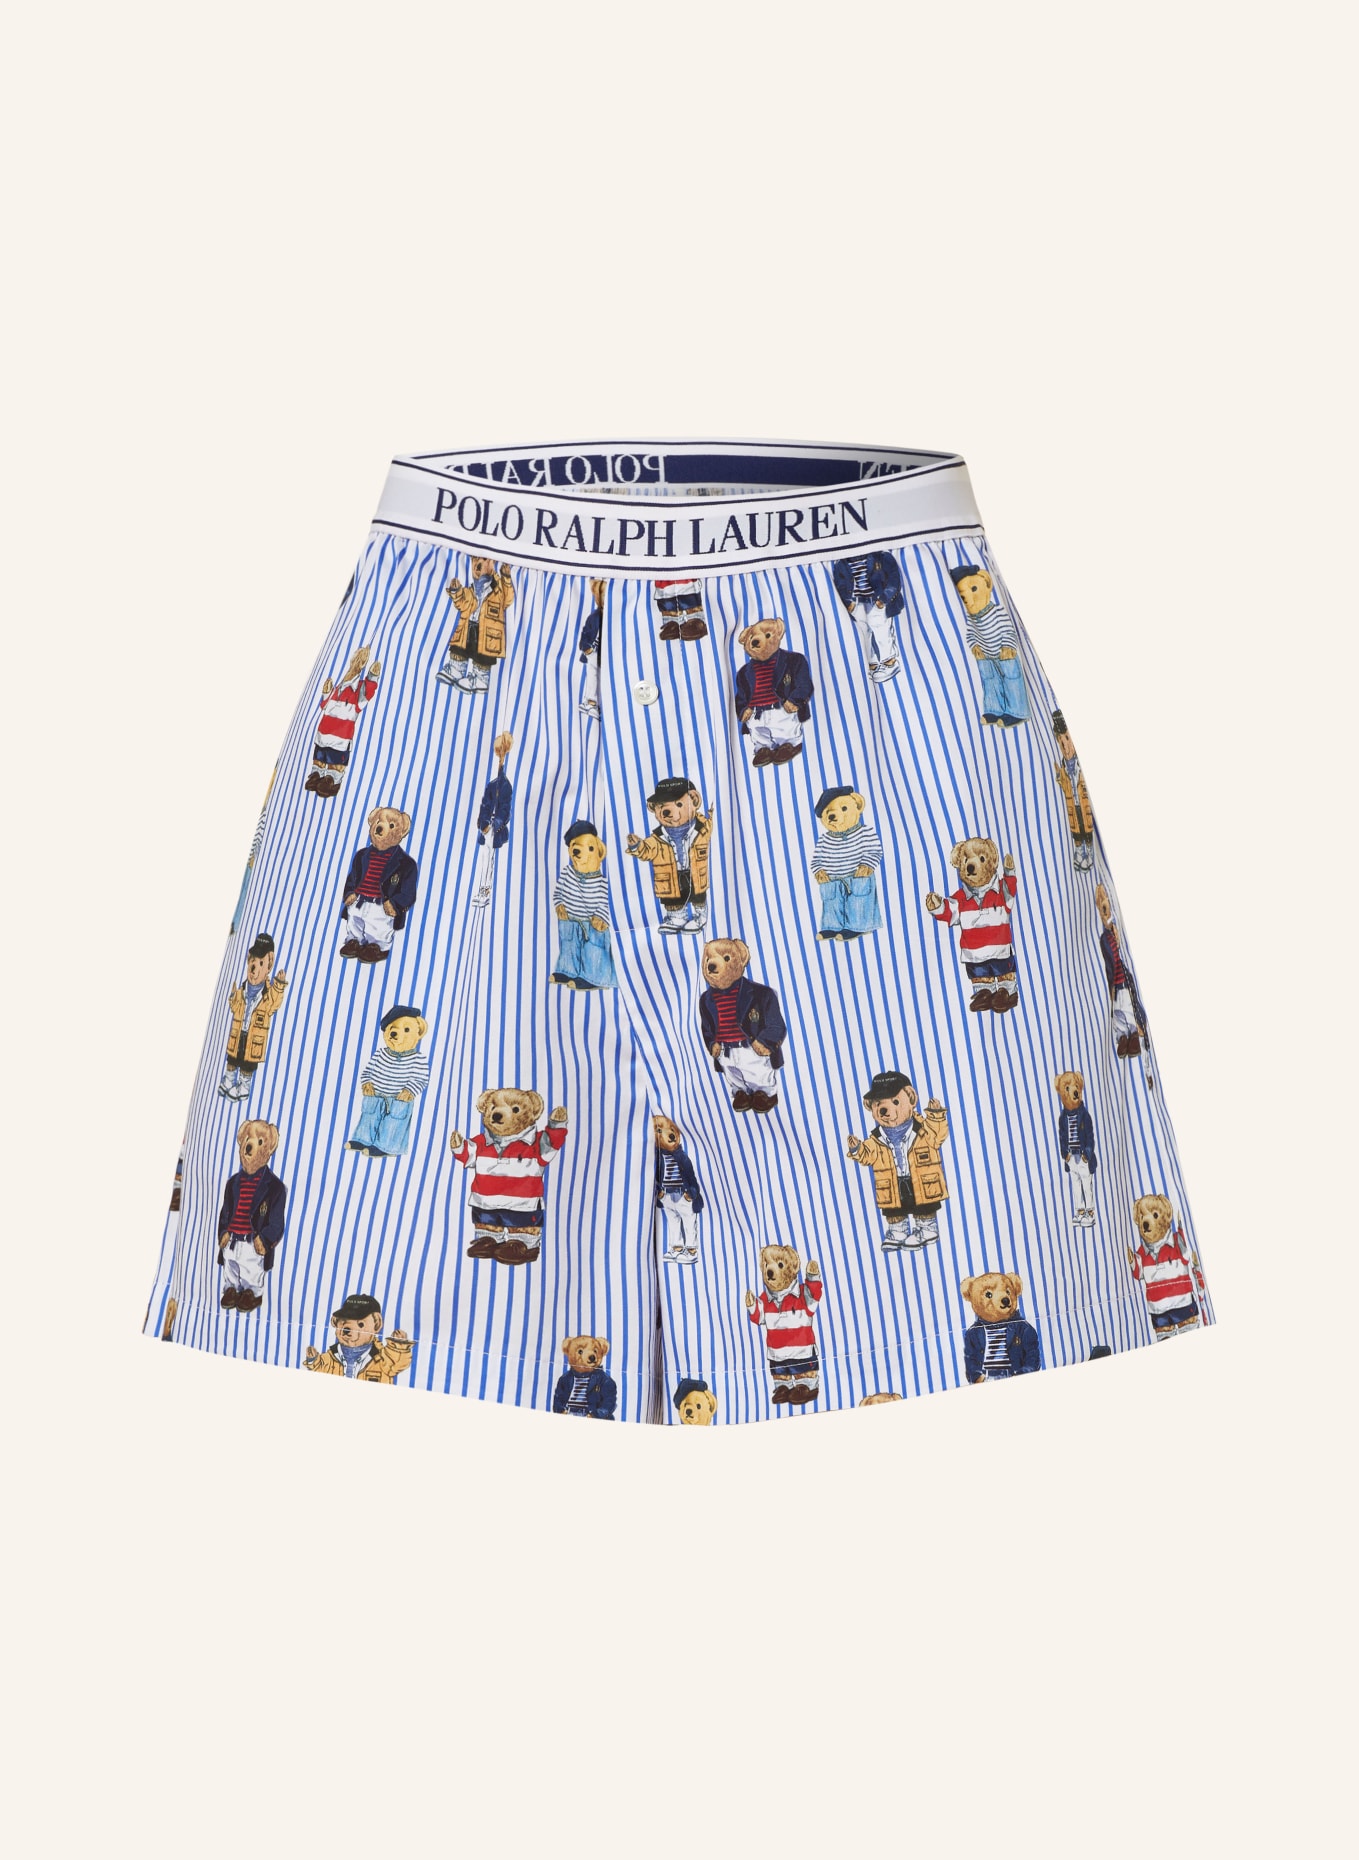 POLO RALPH LAUREN Pajama shorts in white/ blue/ red